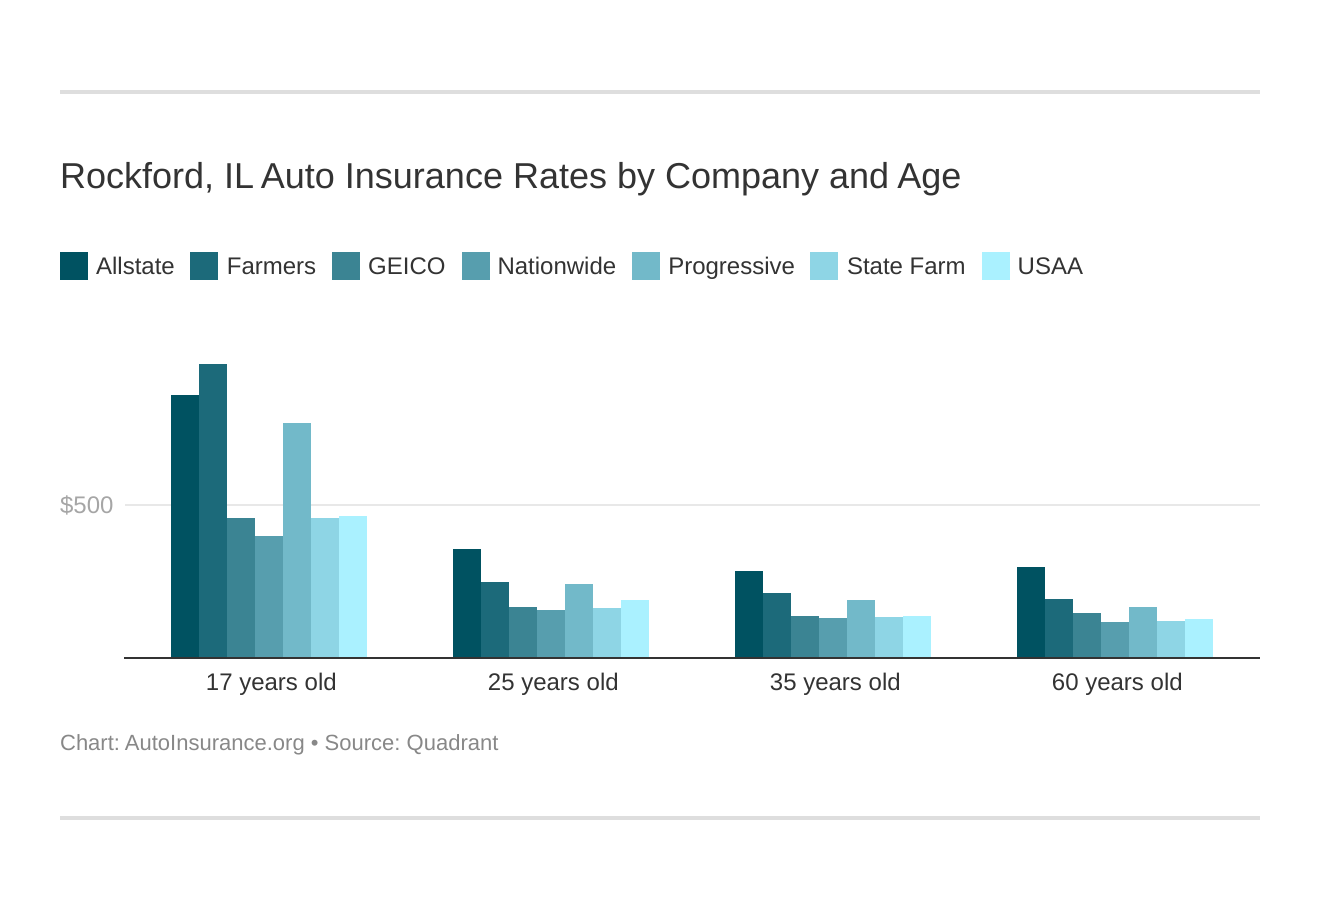 Rockford, IL Auto Insurance Rates by Company and Age